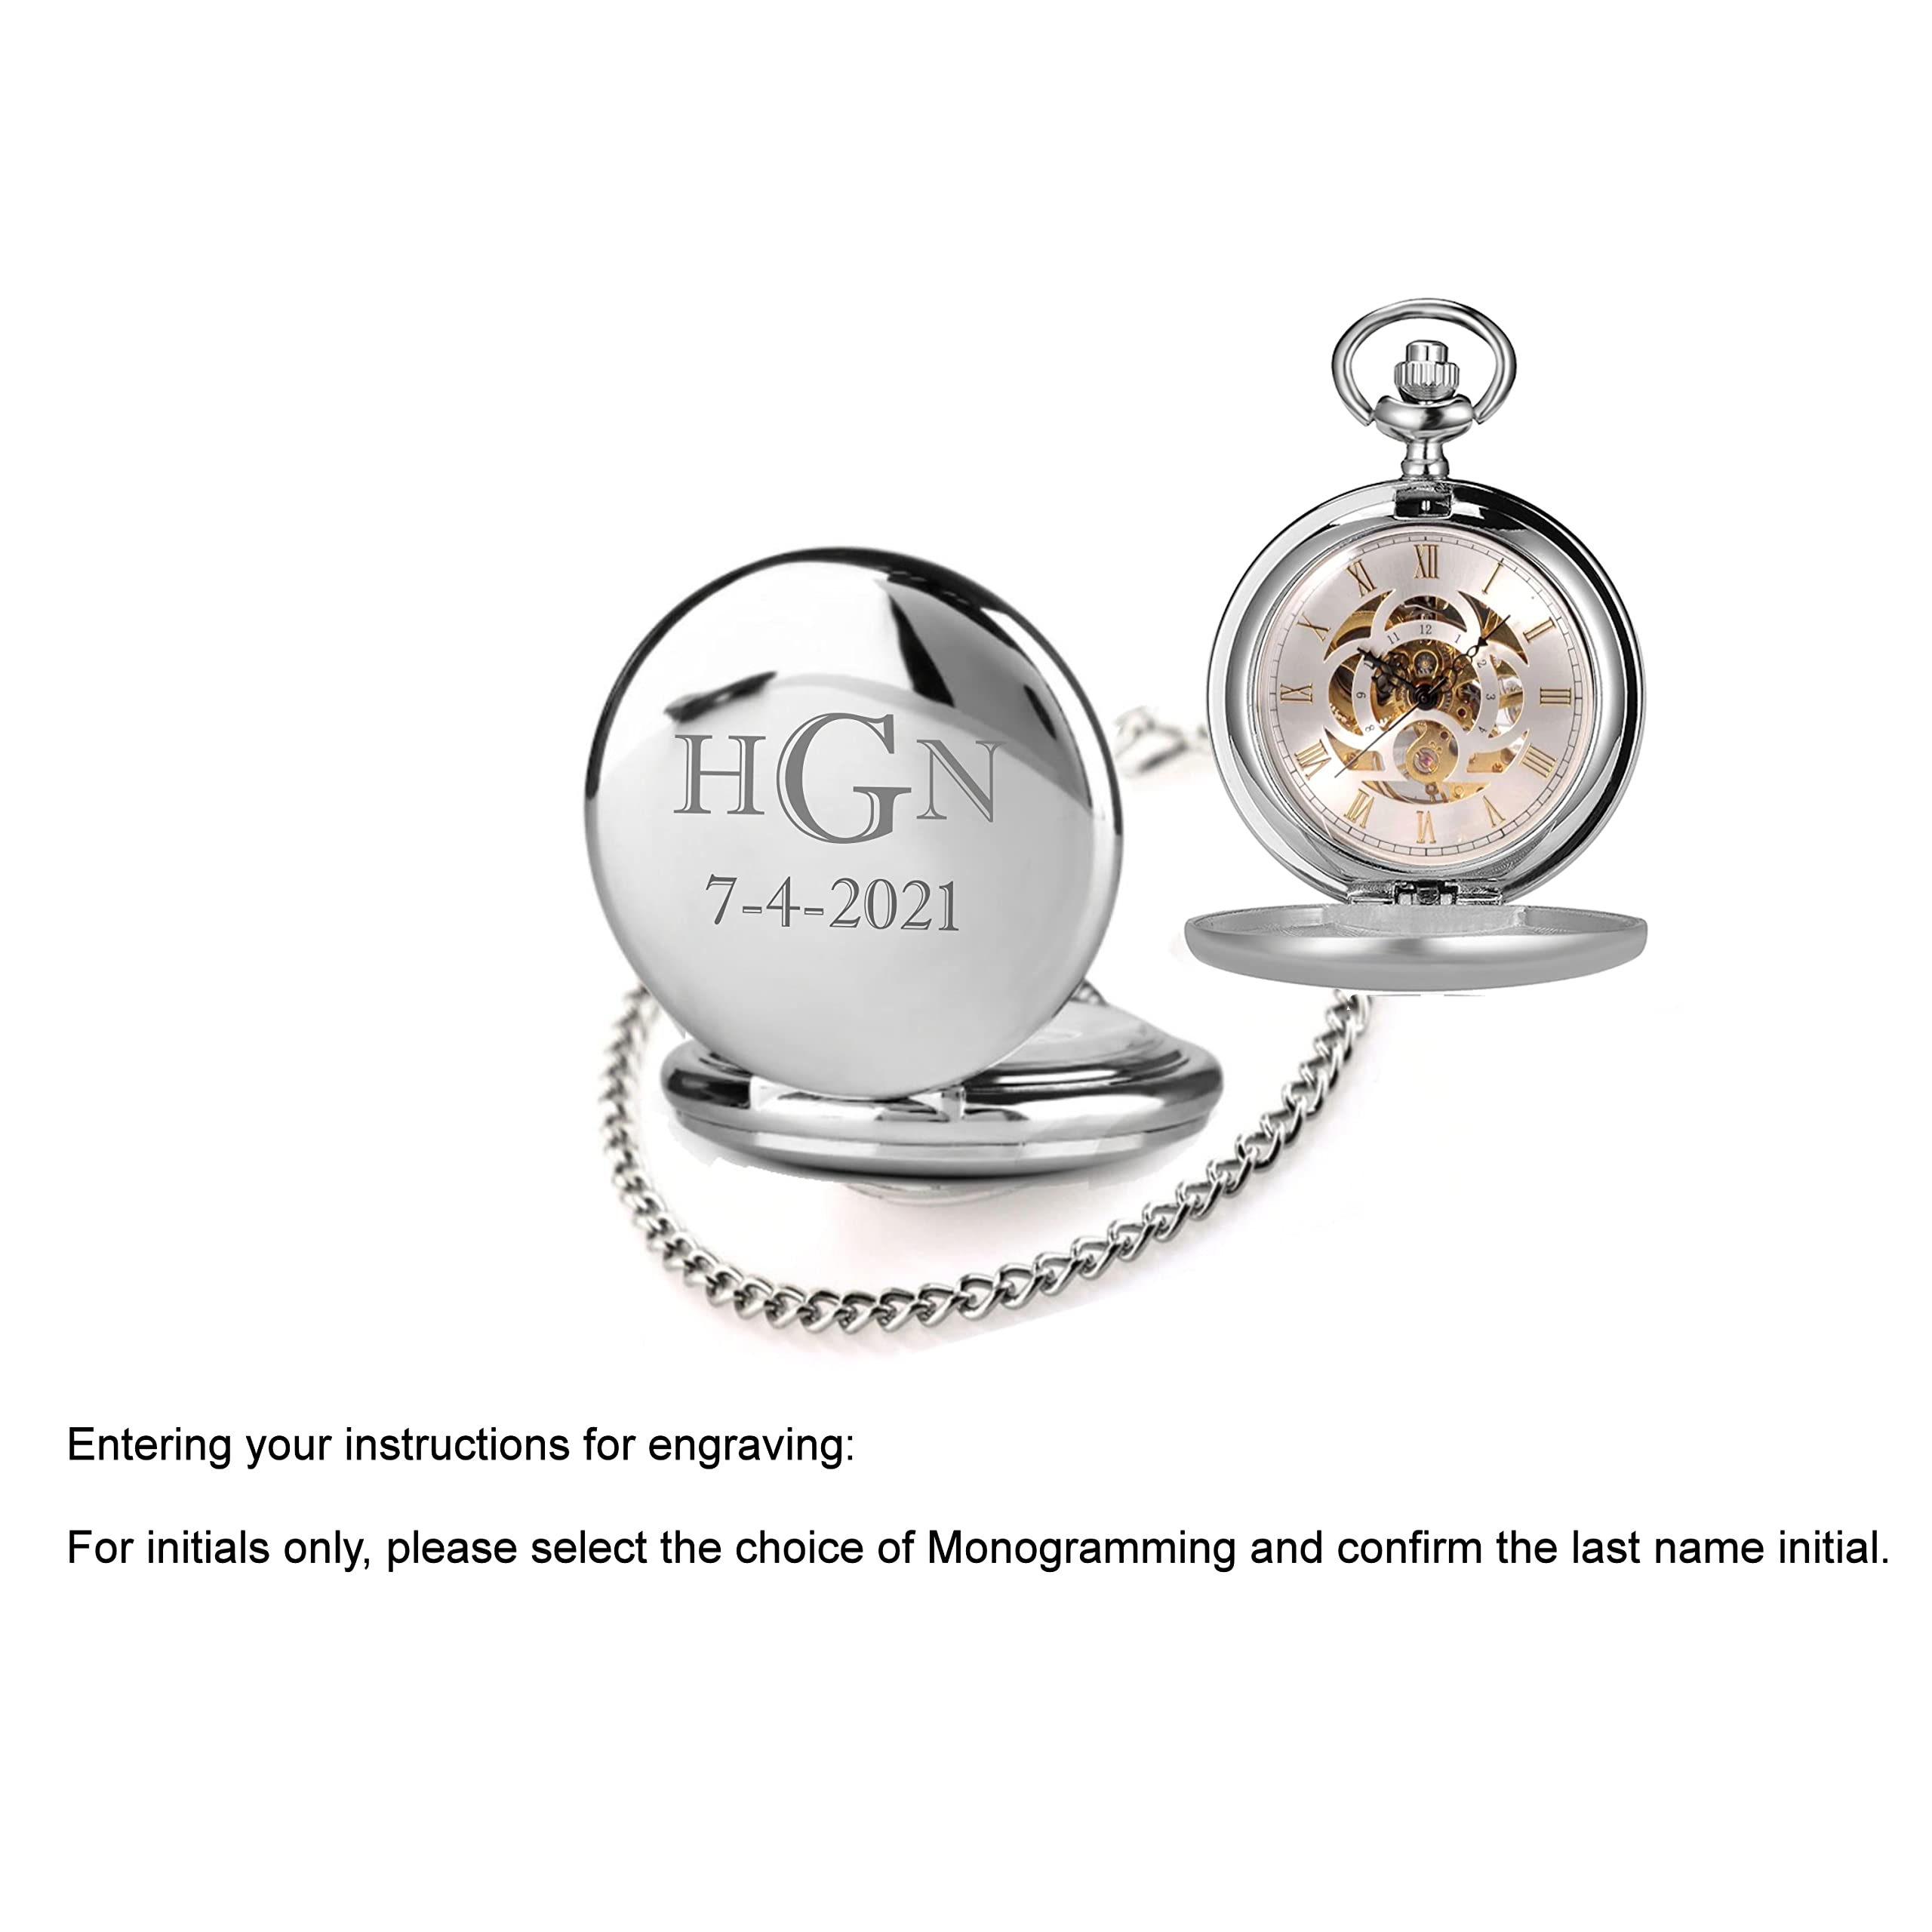 Personalized Antique Mechanical Movement Silver Pocket Watch Custom Engraved Free with Gift Box - Ships from USA (PW51)